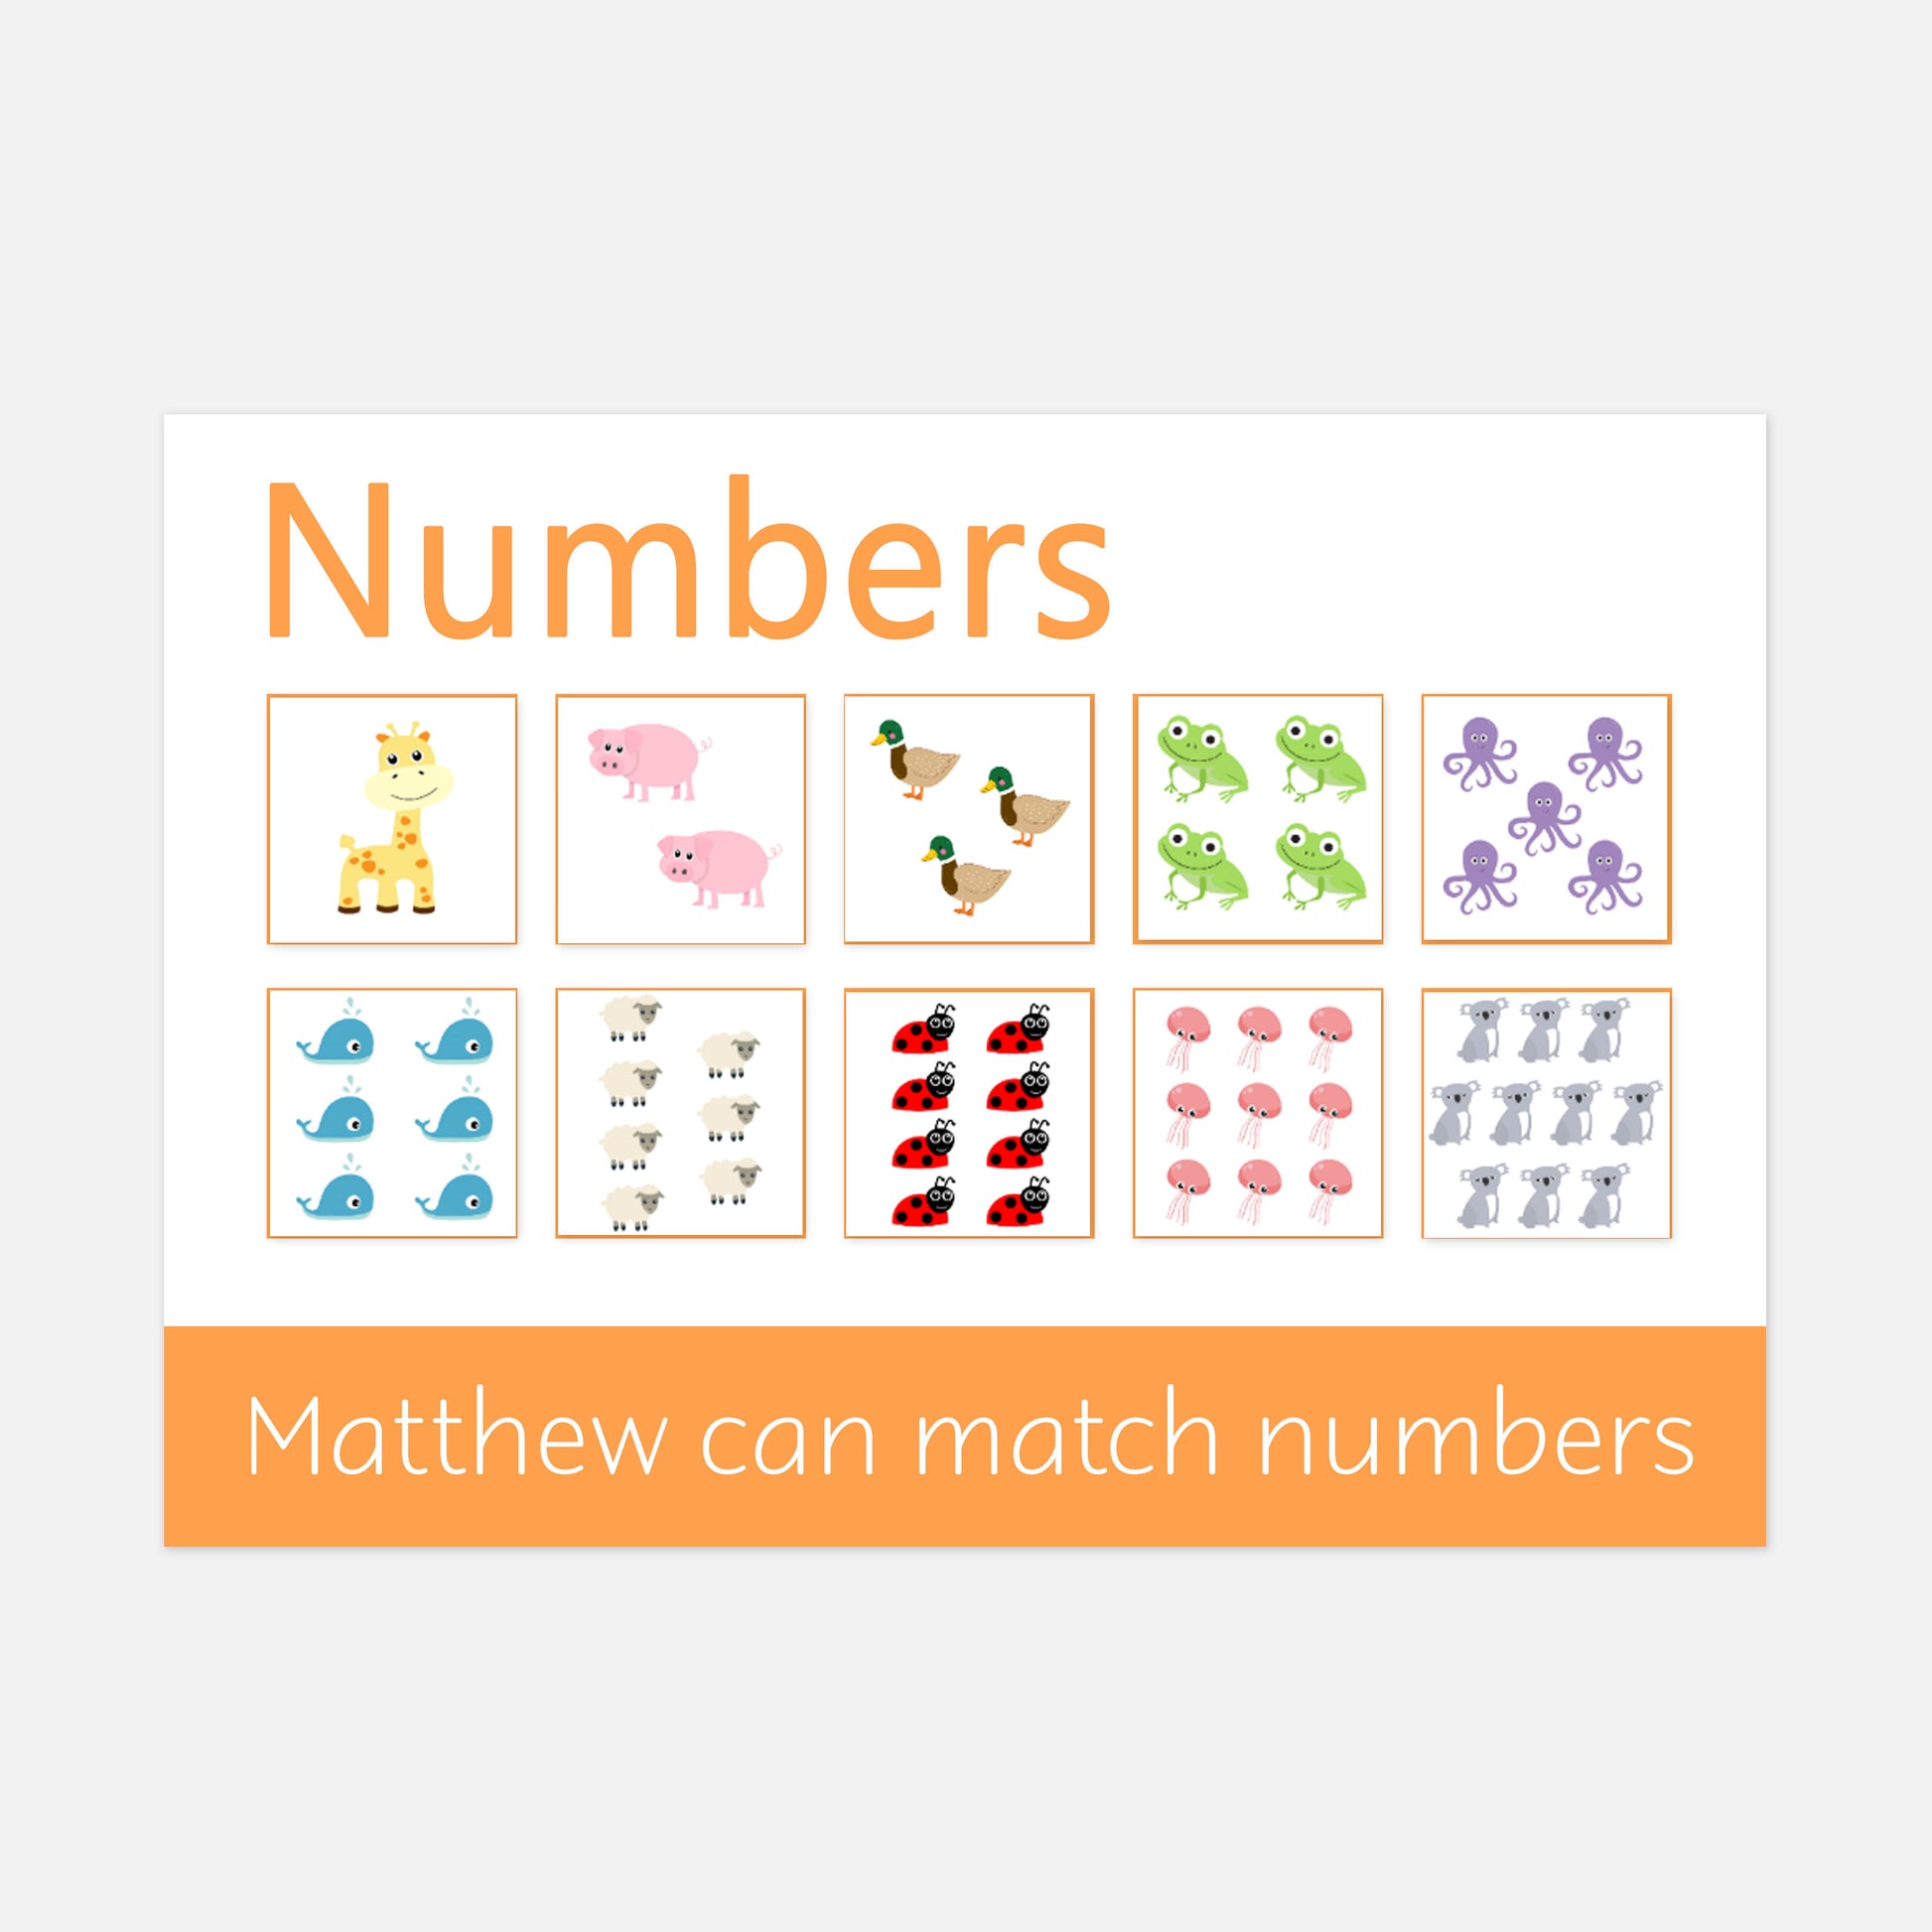 Personalised Numbers Learning Mat (Counting)-Little Boo Learning-1-10,counting,maths,Numbers,numeracy